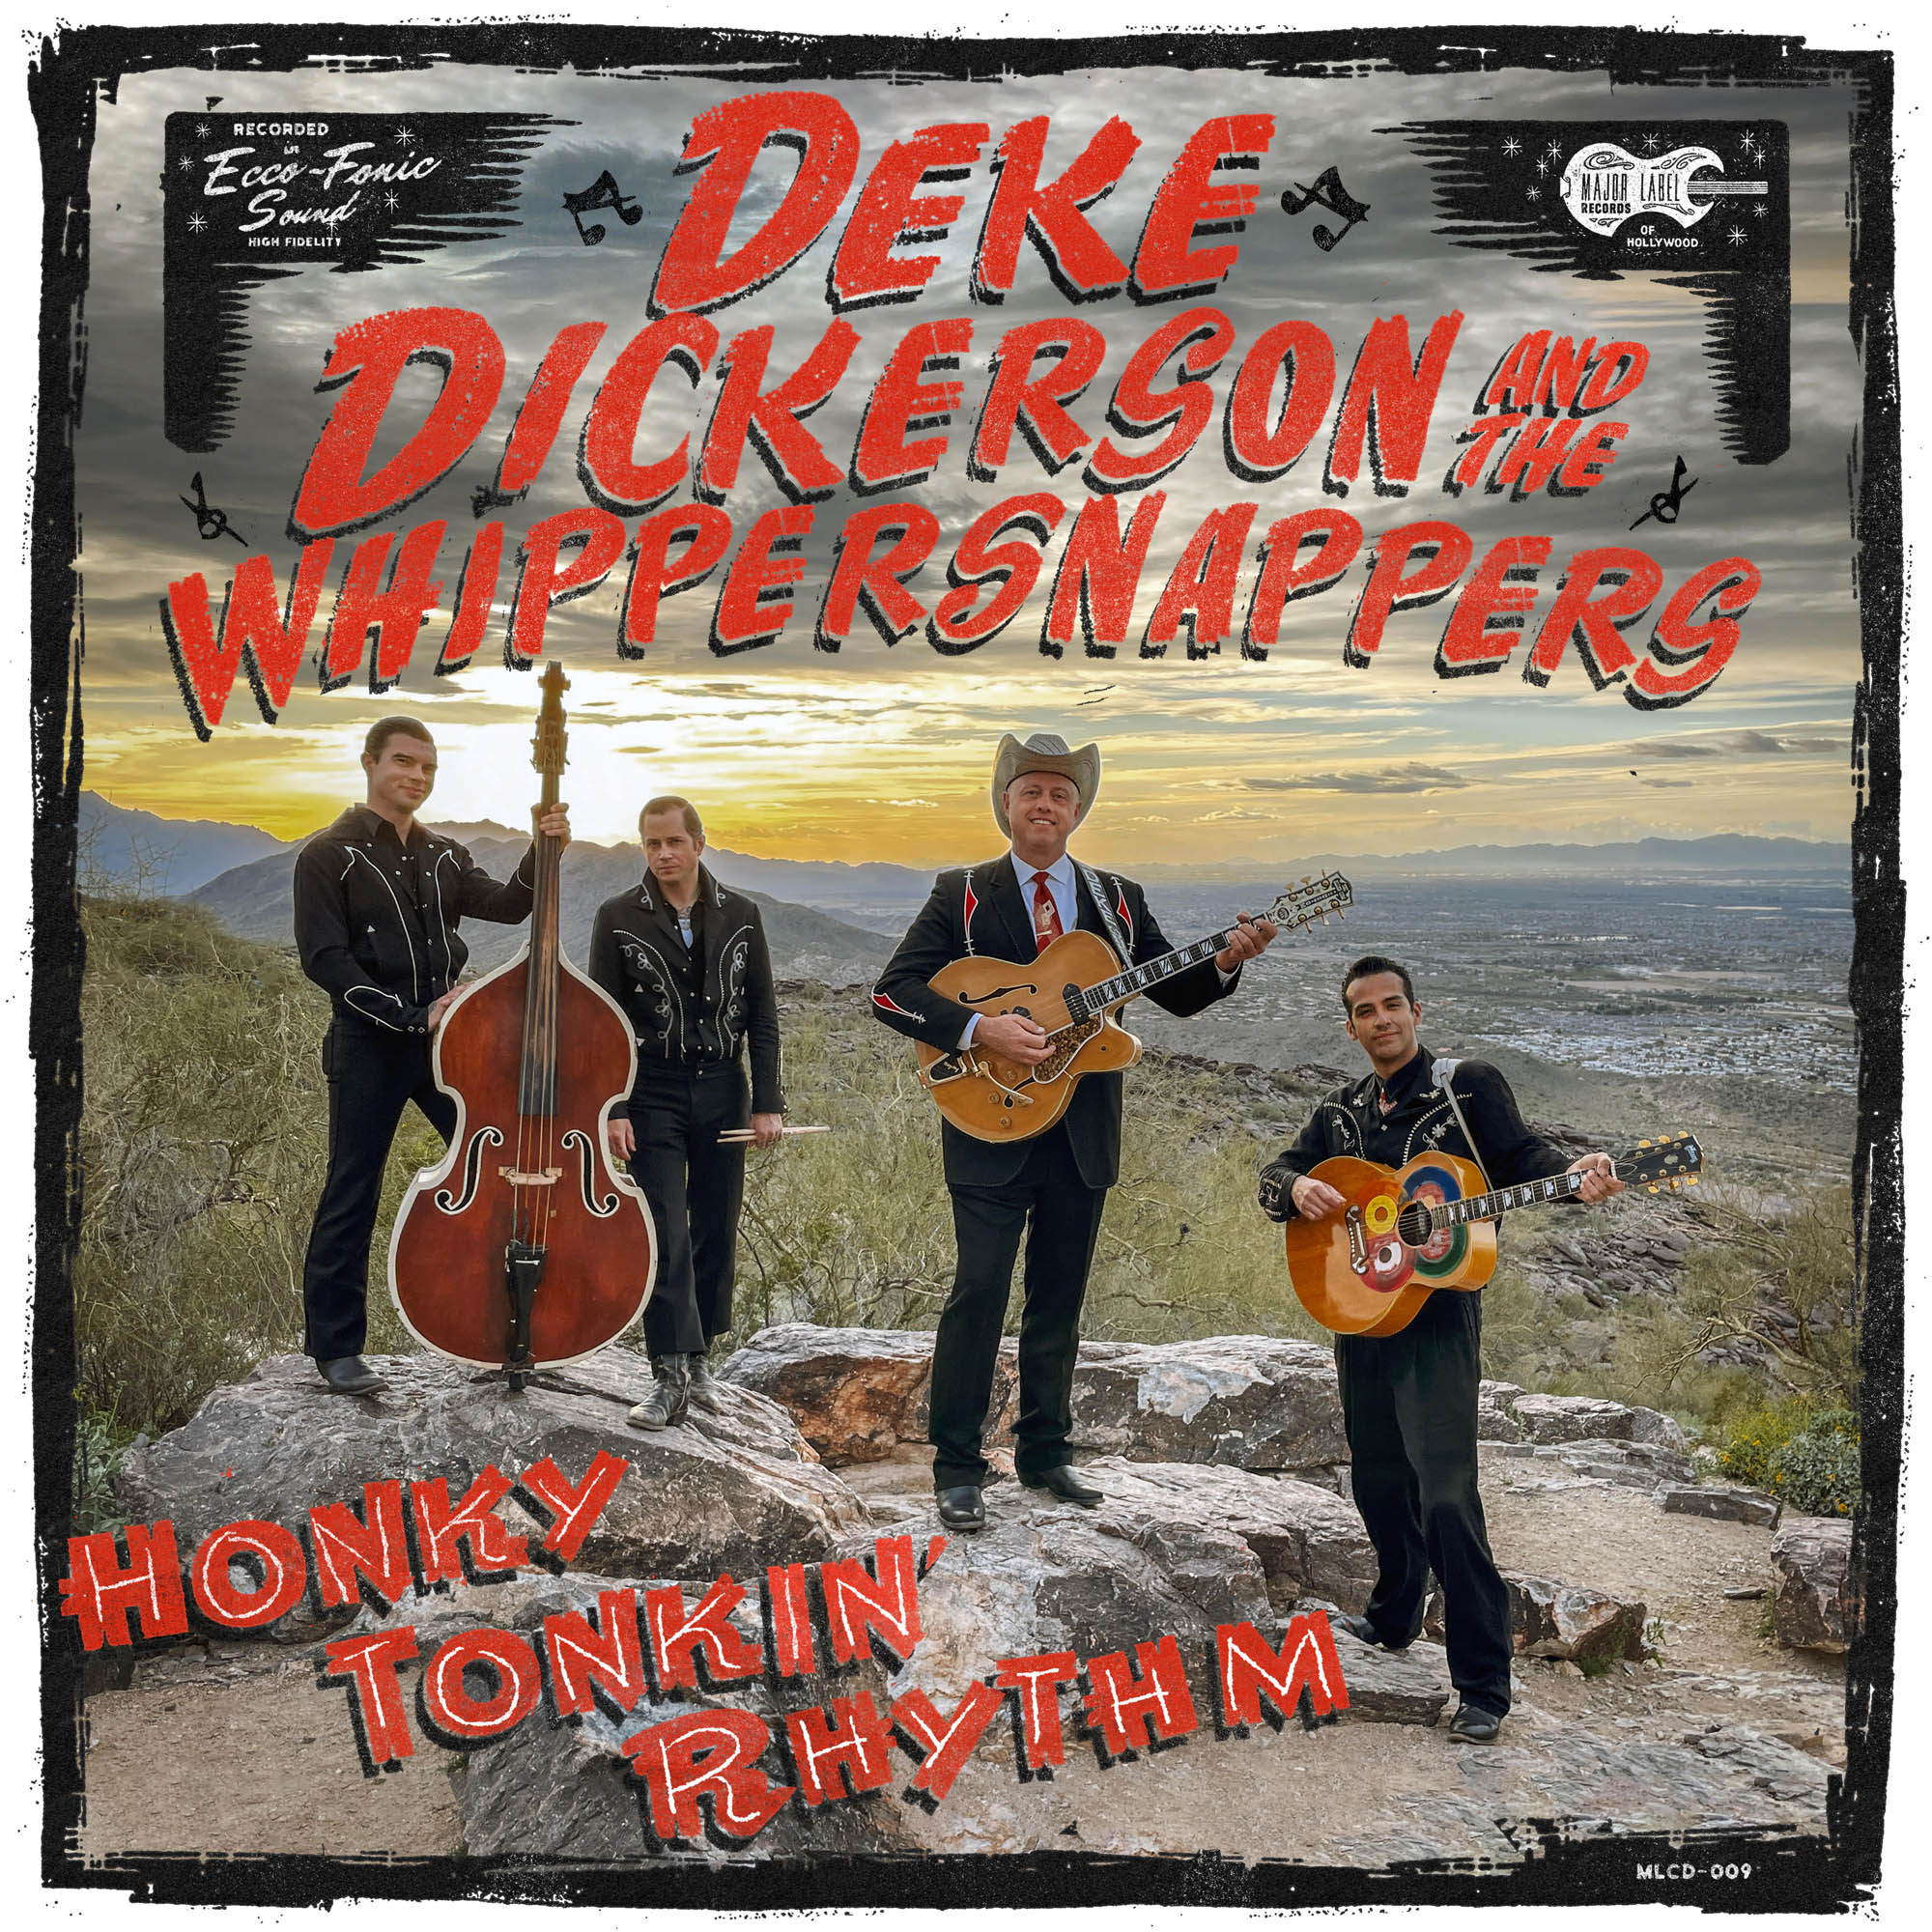 Deke and the Whippersnappers 7-inch